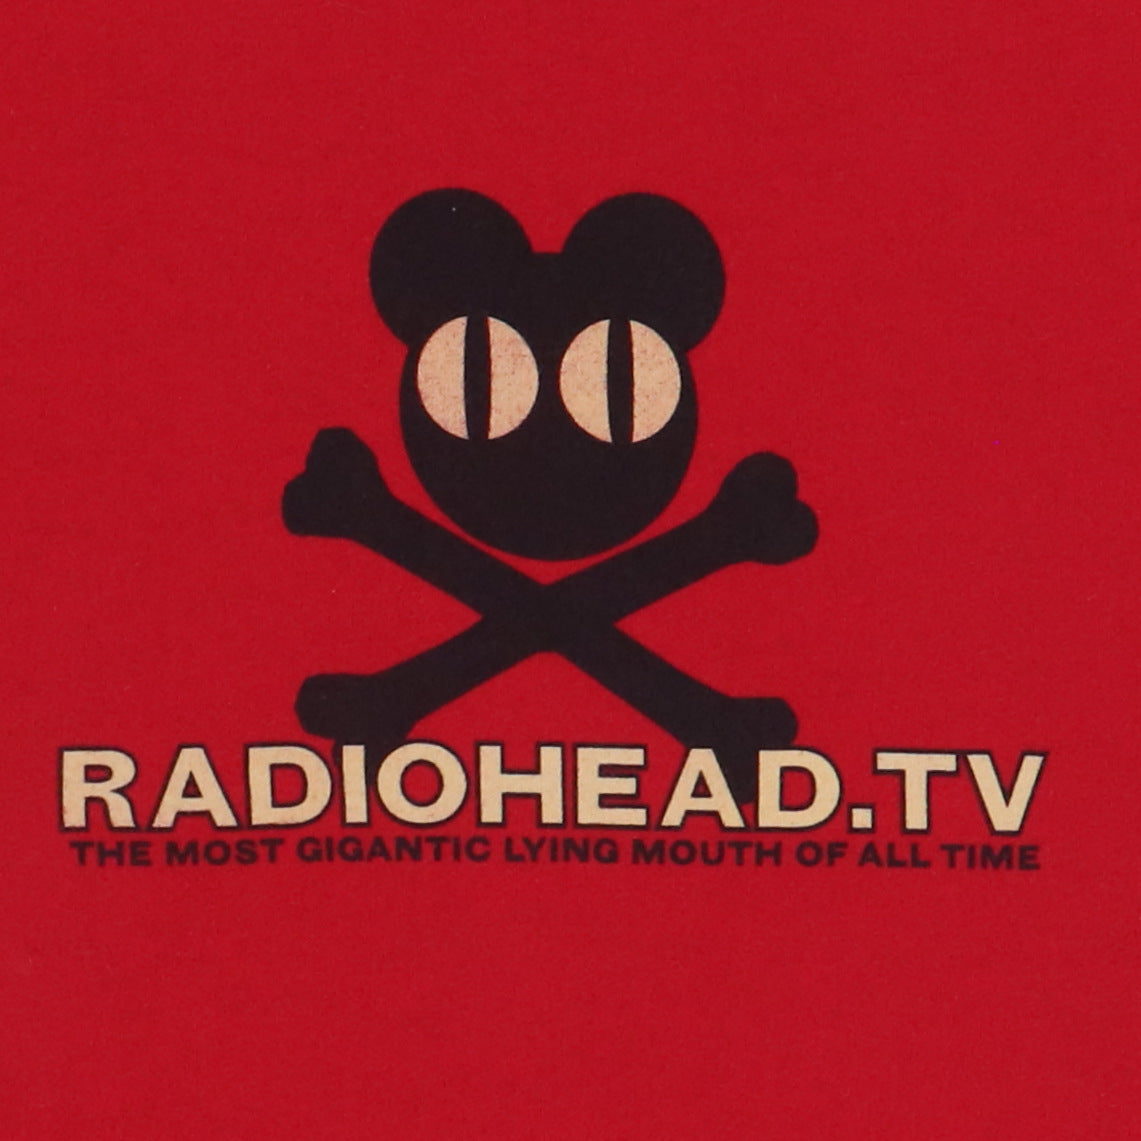 2001 Radiohead The Most Gigantic Lying Mouth Shirt